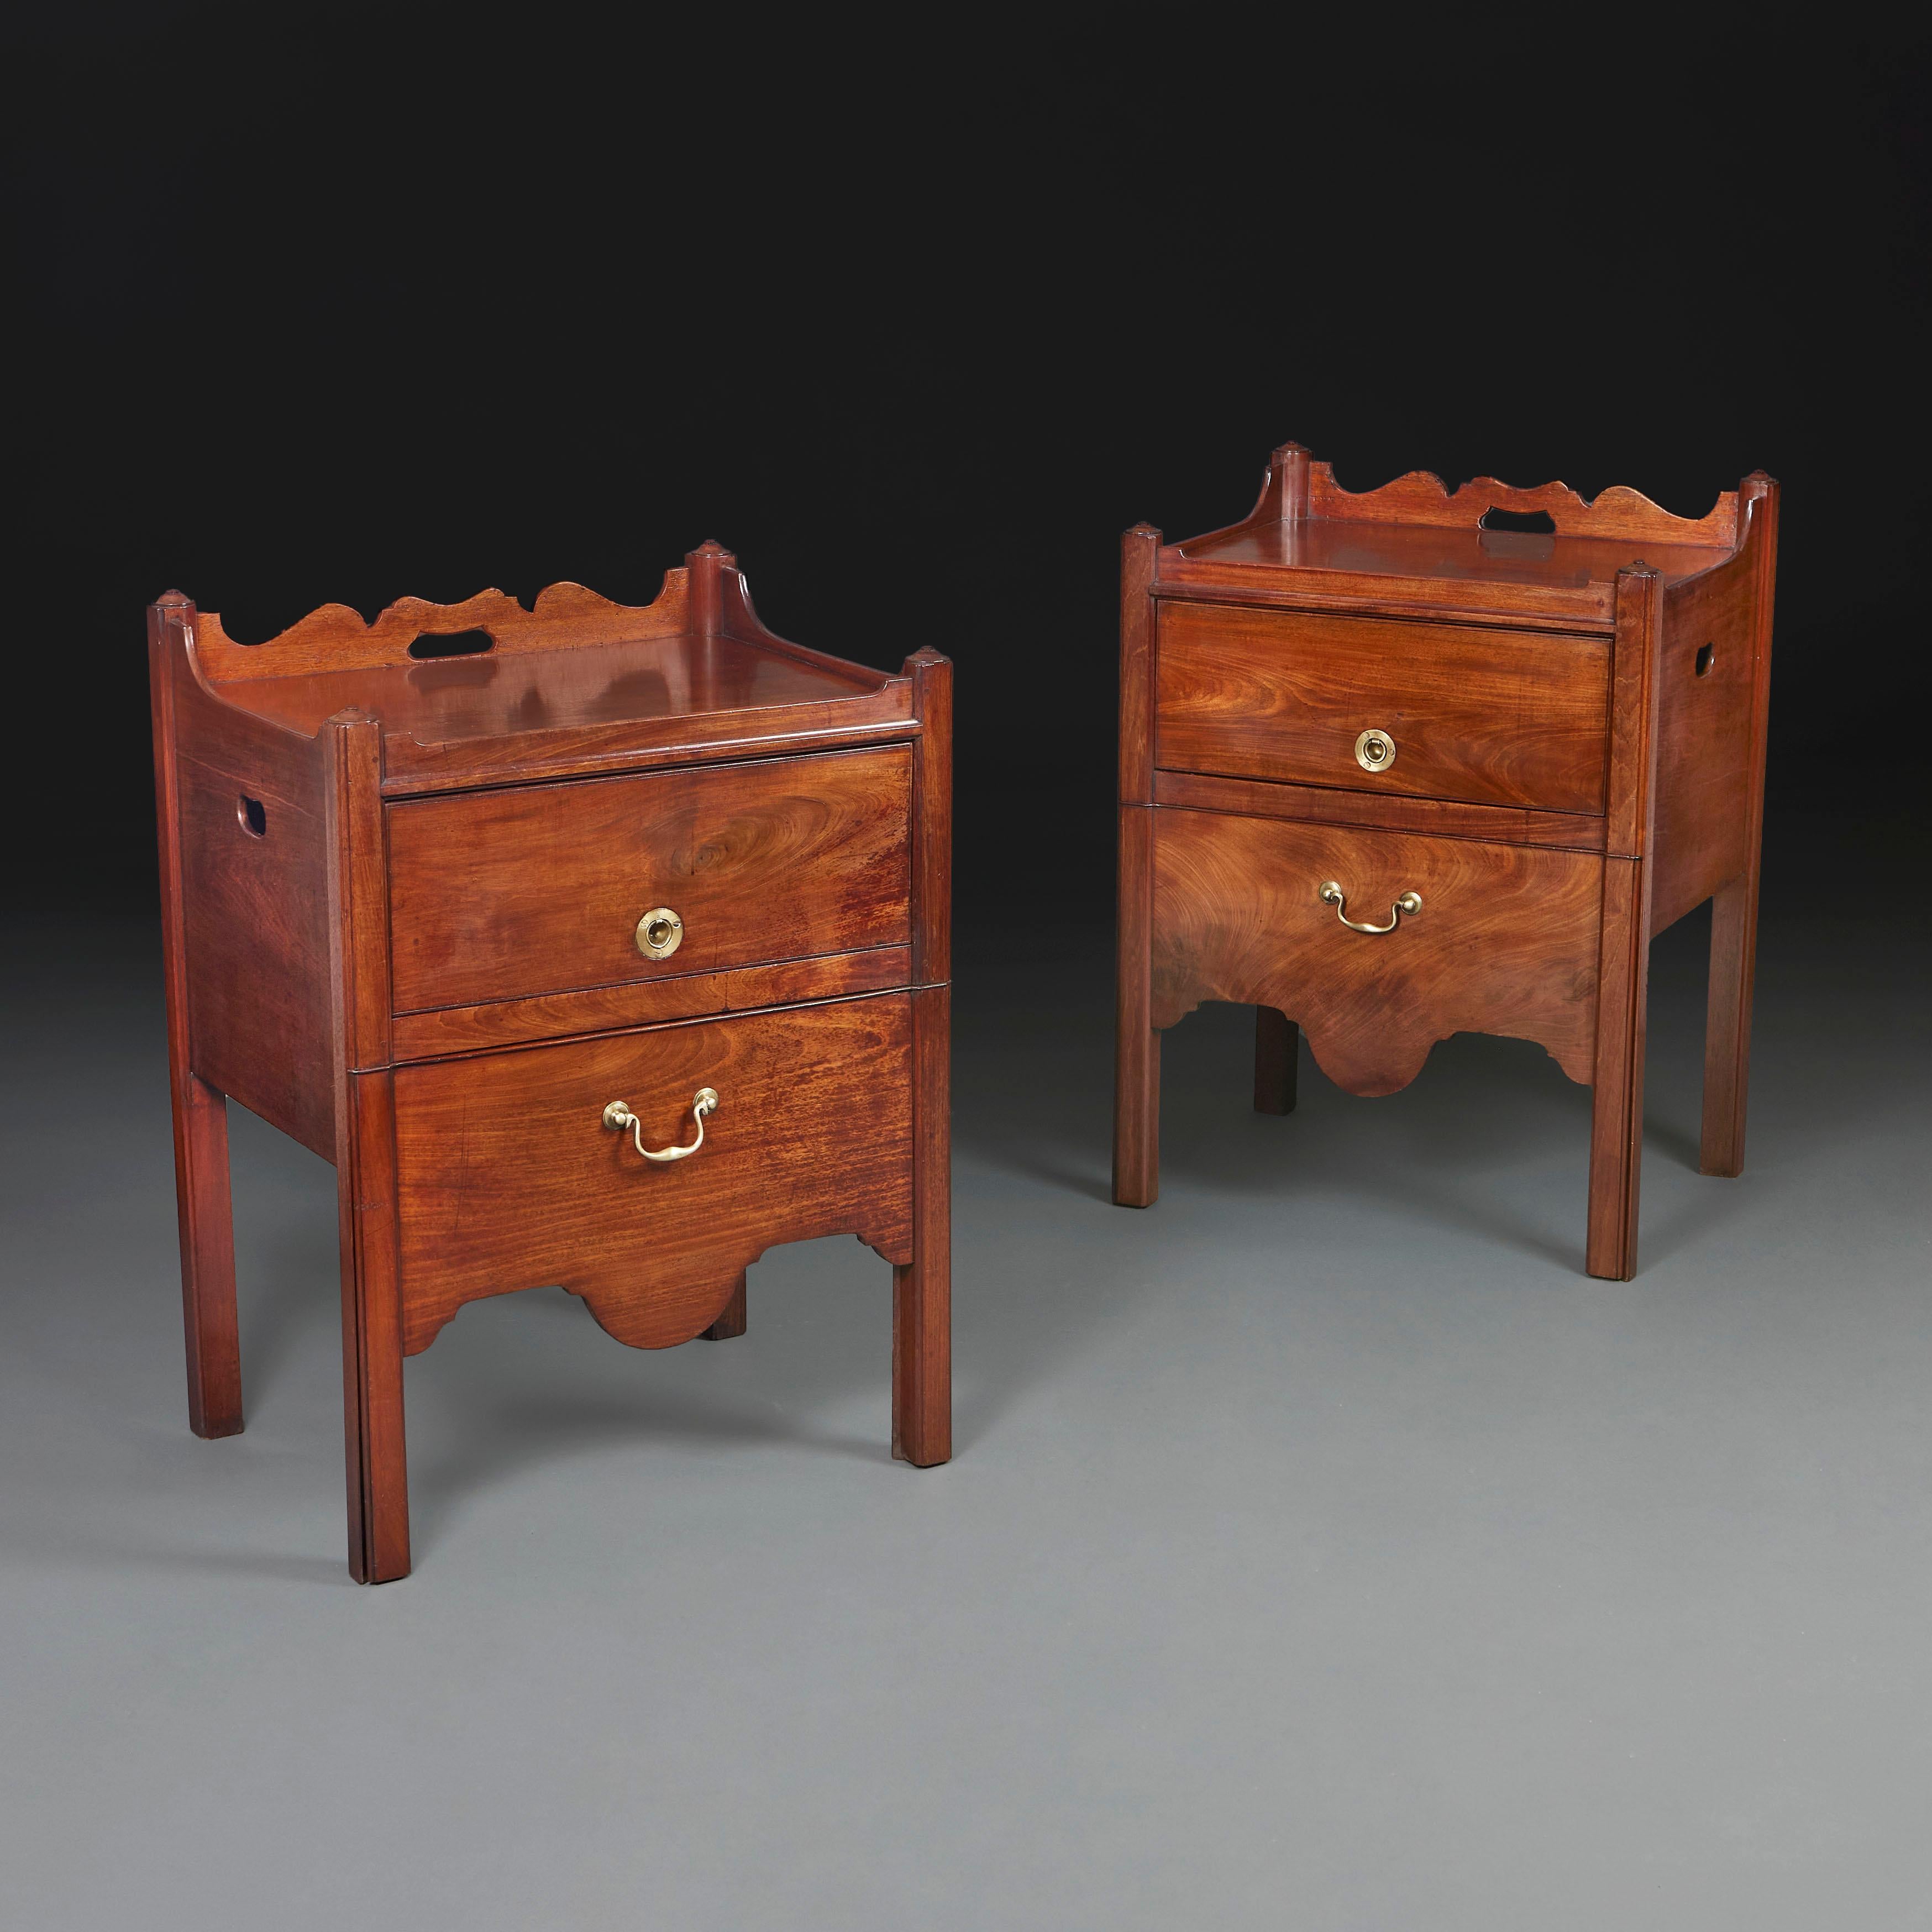 England, circa 1760

A fine pair of mid eighteenth century mahogany bedside cabinets, with shaped rails and carrying handles, the lower drawer revealing a horizontal surface, cupboard doors with ring pull handles, all supported on square legs.